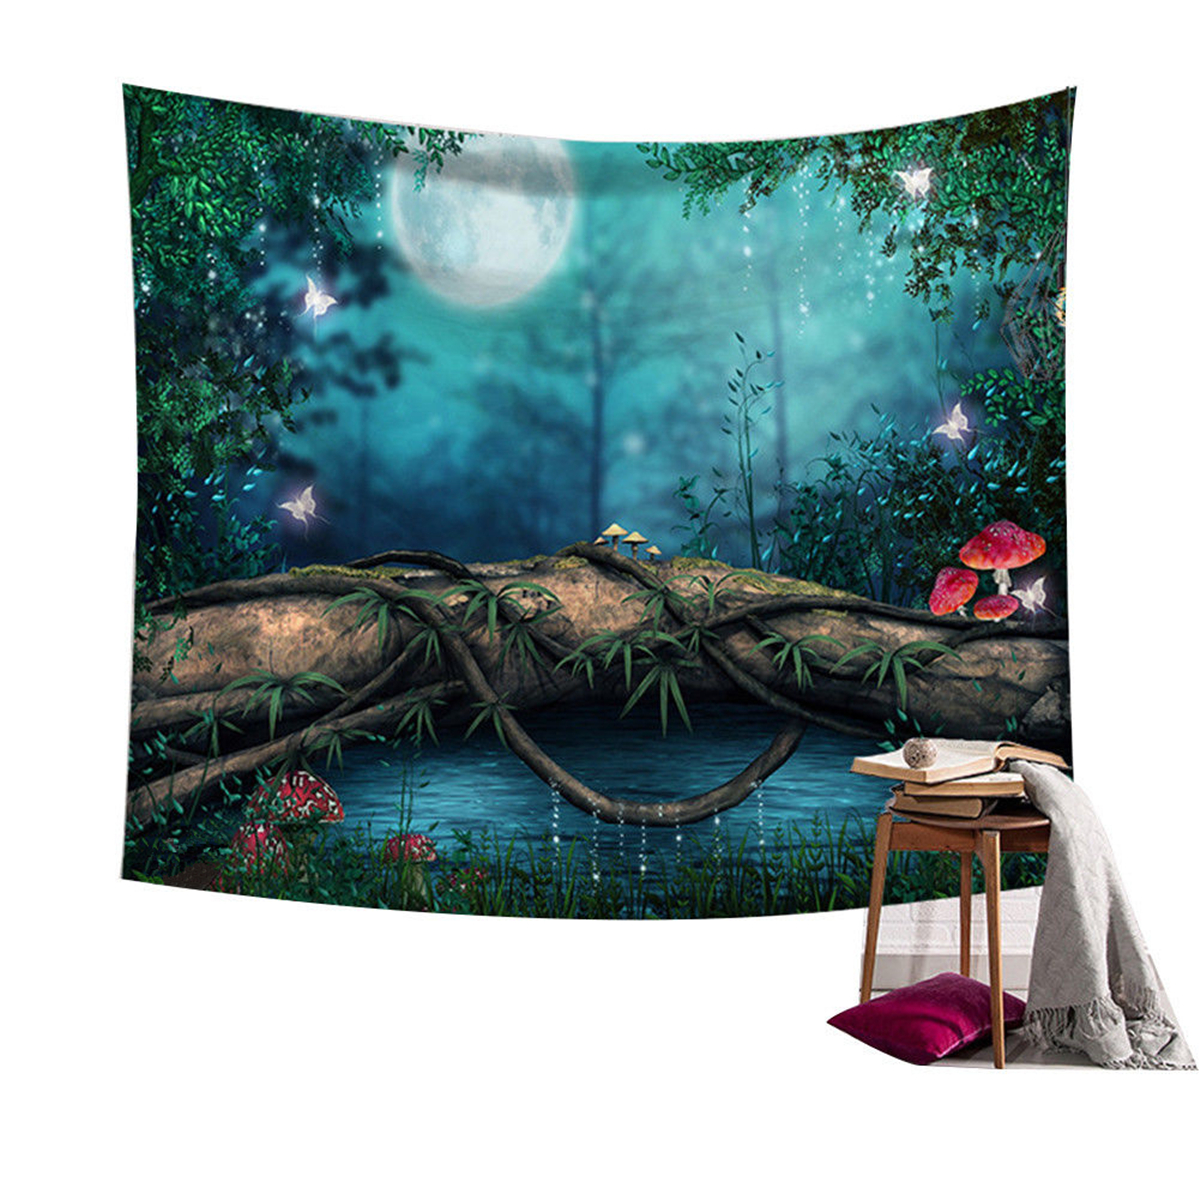 Fairy-Forest-Hanging-Wall-Tapestry-Bohemian-Hippie-Throw-Bedspread-Home-Decorations-1309251-6